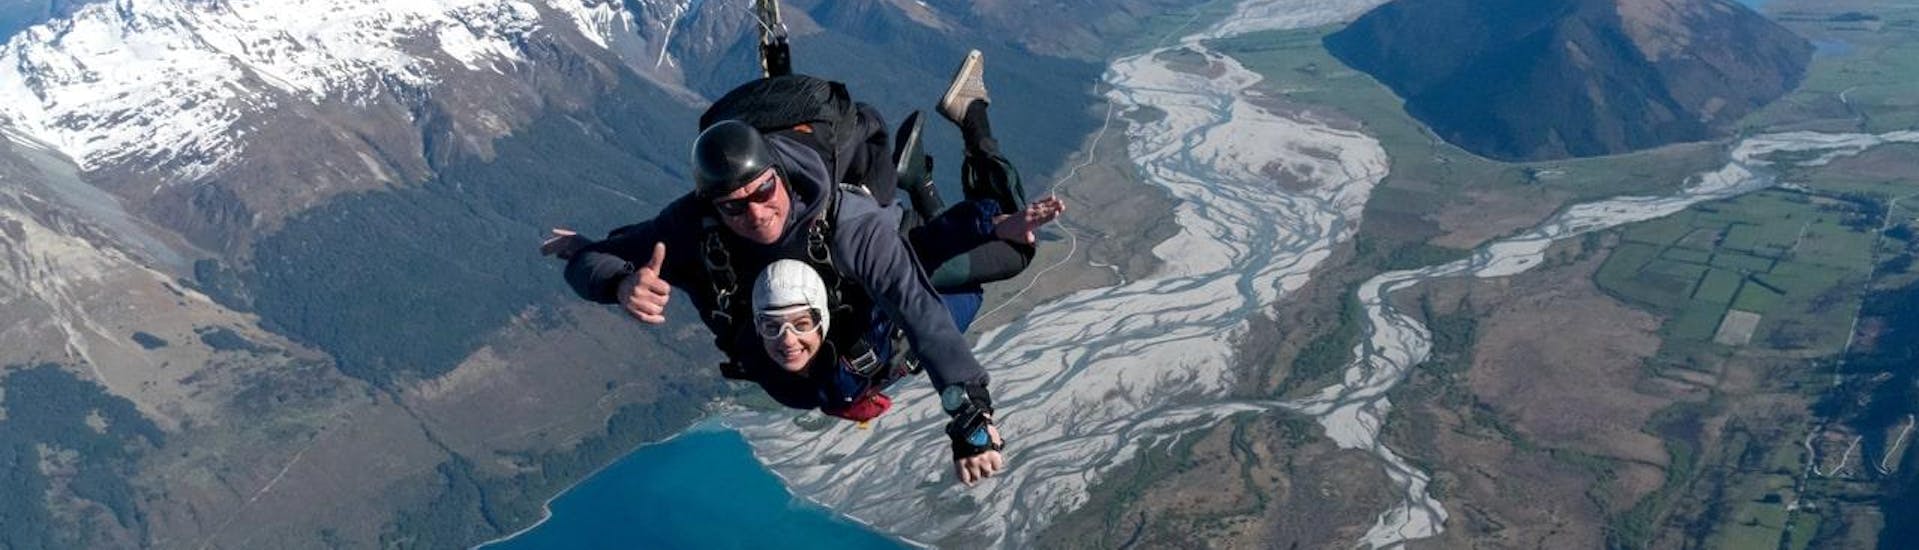 A tandem master from Skydive Southern Alps Queenstown and his passenger are smiling at the camera as they skydive over the Dart River estuary near Glenorchy.